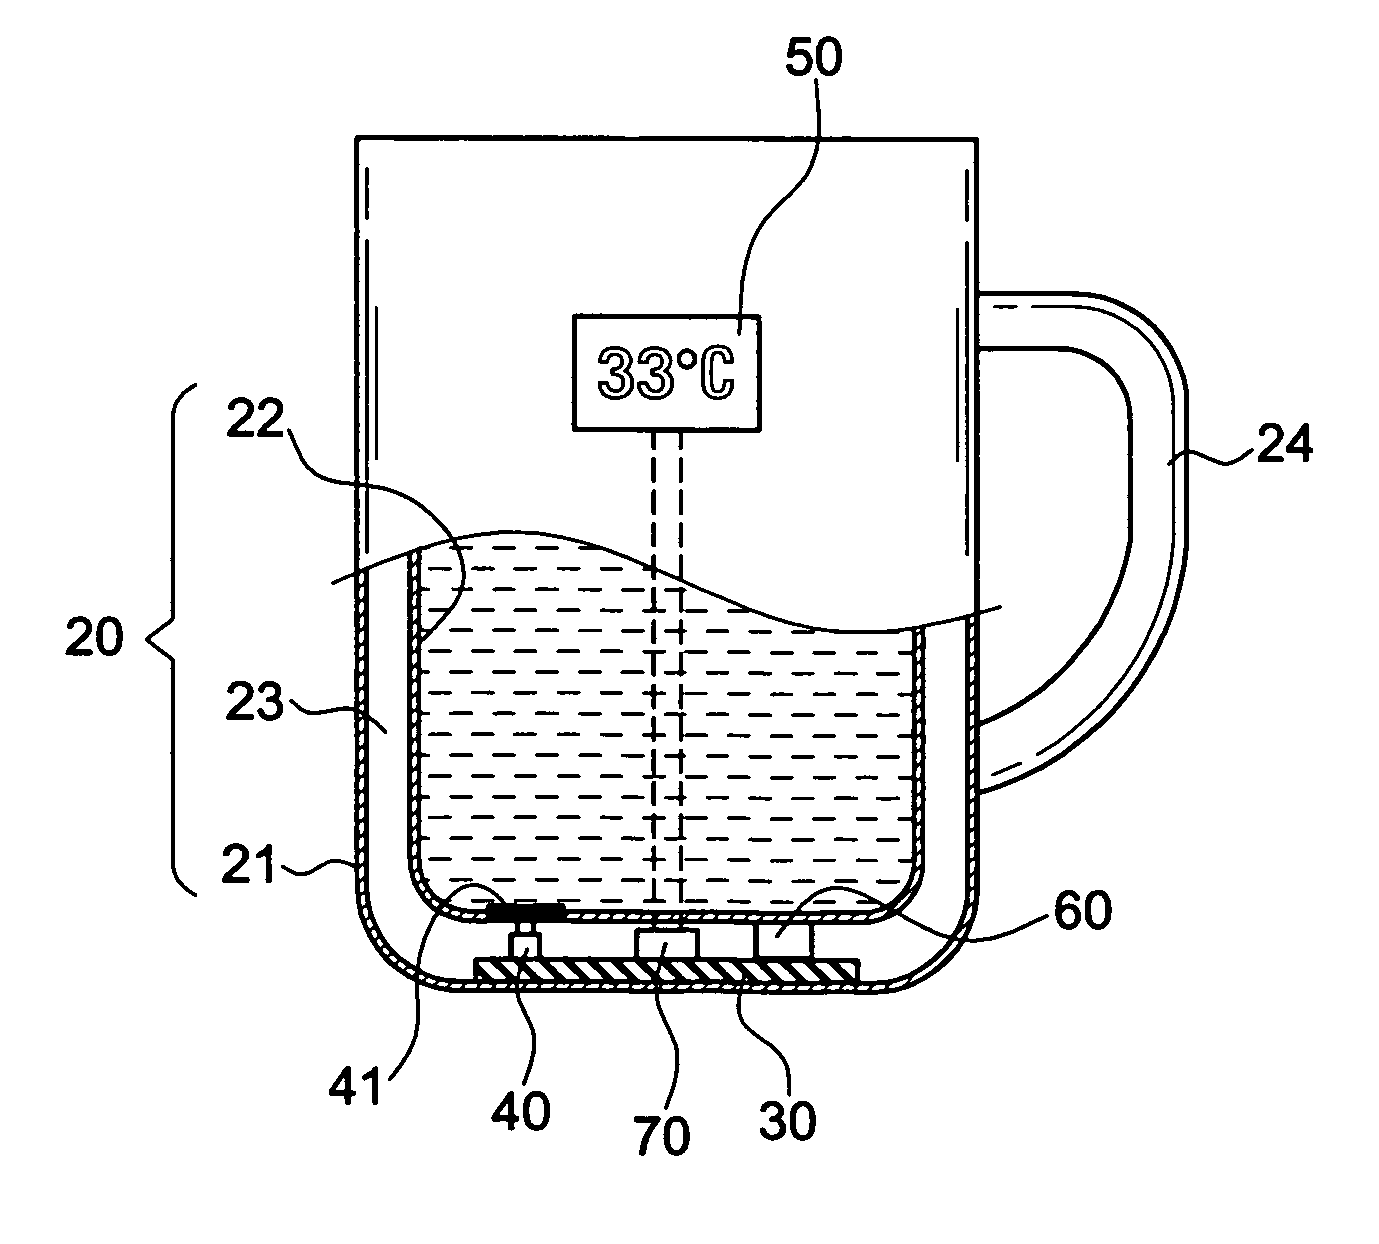 Liquid container capable of self-generating power and showing temprature